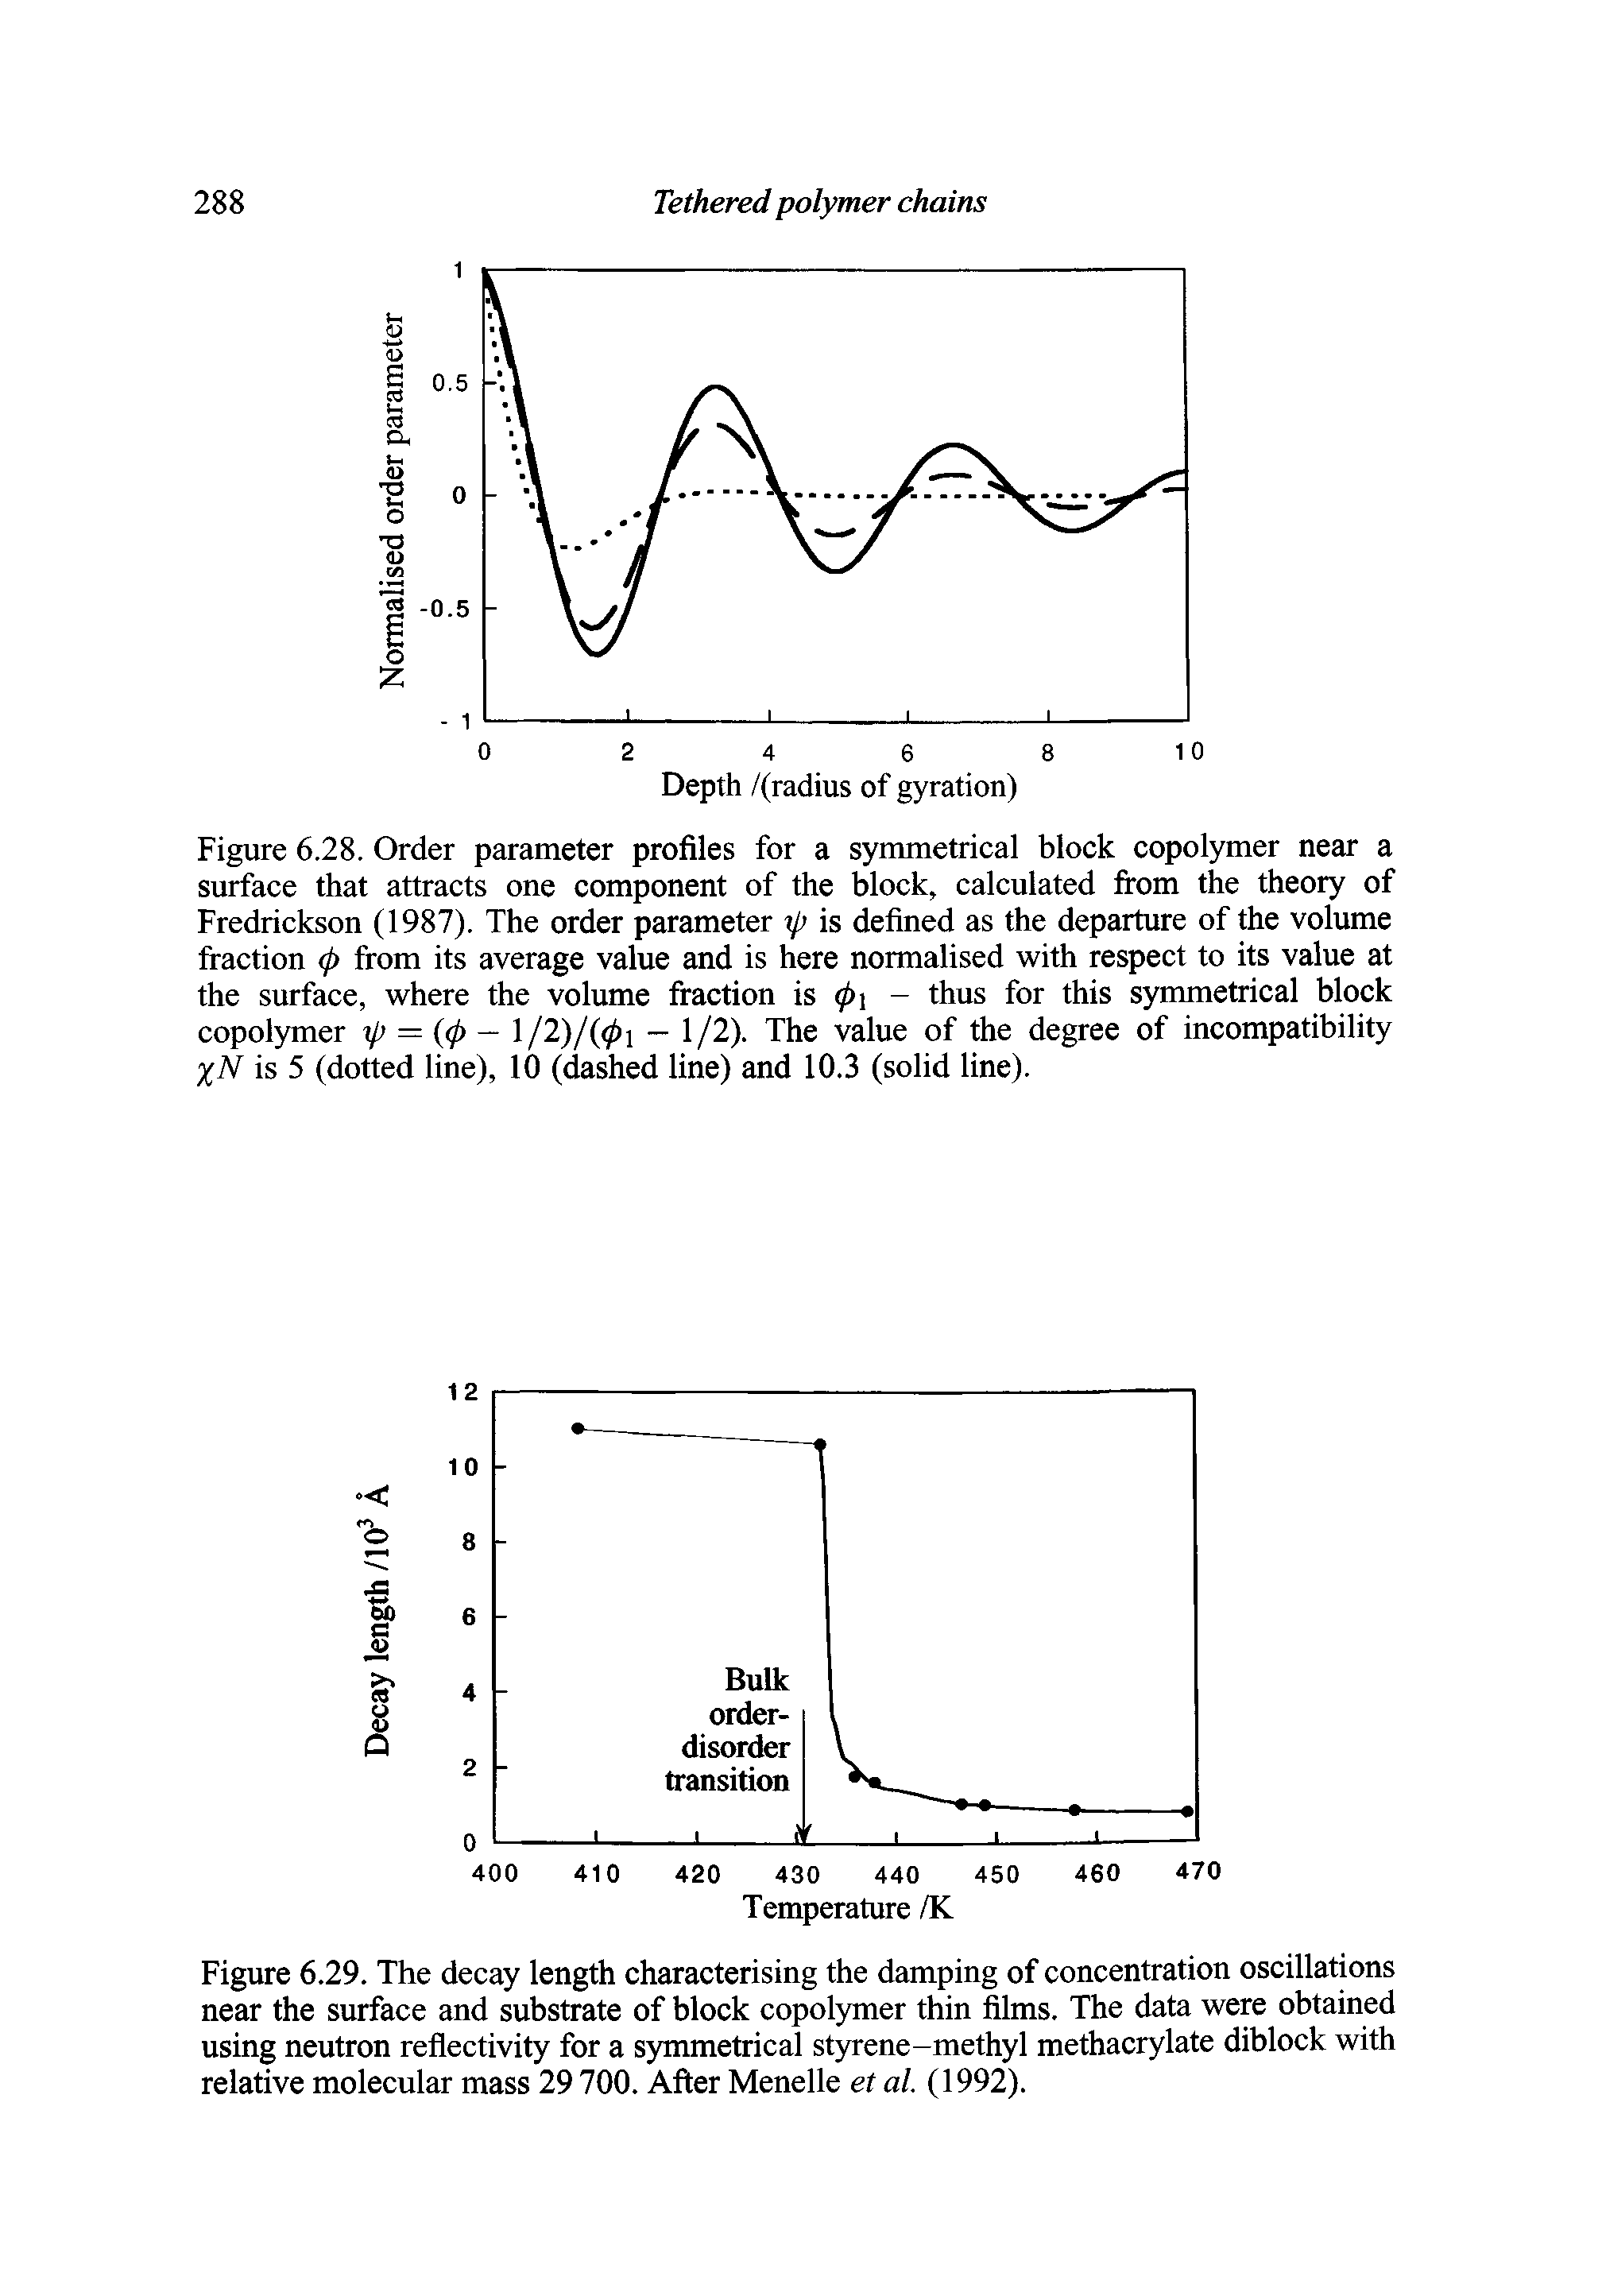 Figure 6.29. The decay length characterising the damping of concentration oscillations near the surface and substrate of block copolymer thin films. The data were obtained using neutron reflectivity for a symmetrical styrene-methyl methacrylate diblock with relative molecular mass 29 700. After Menelle et al. (1992).